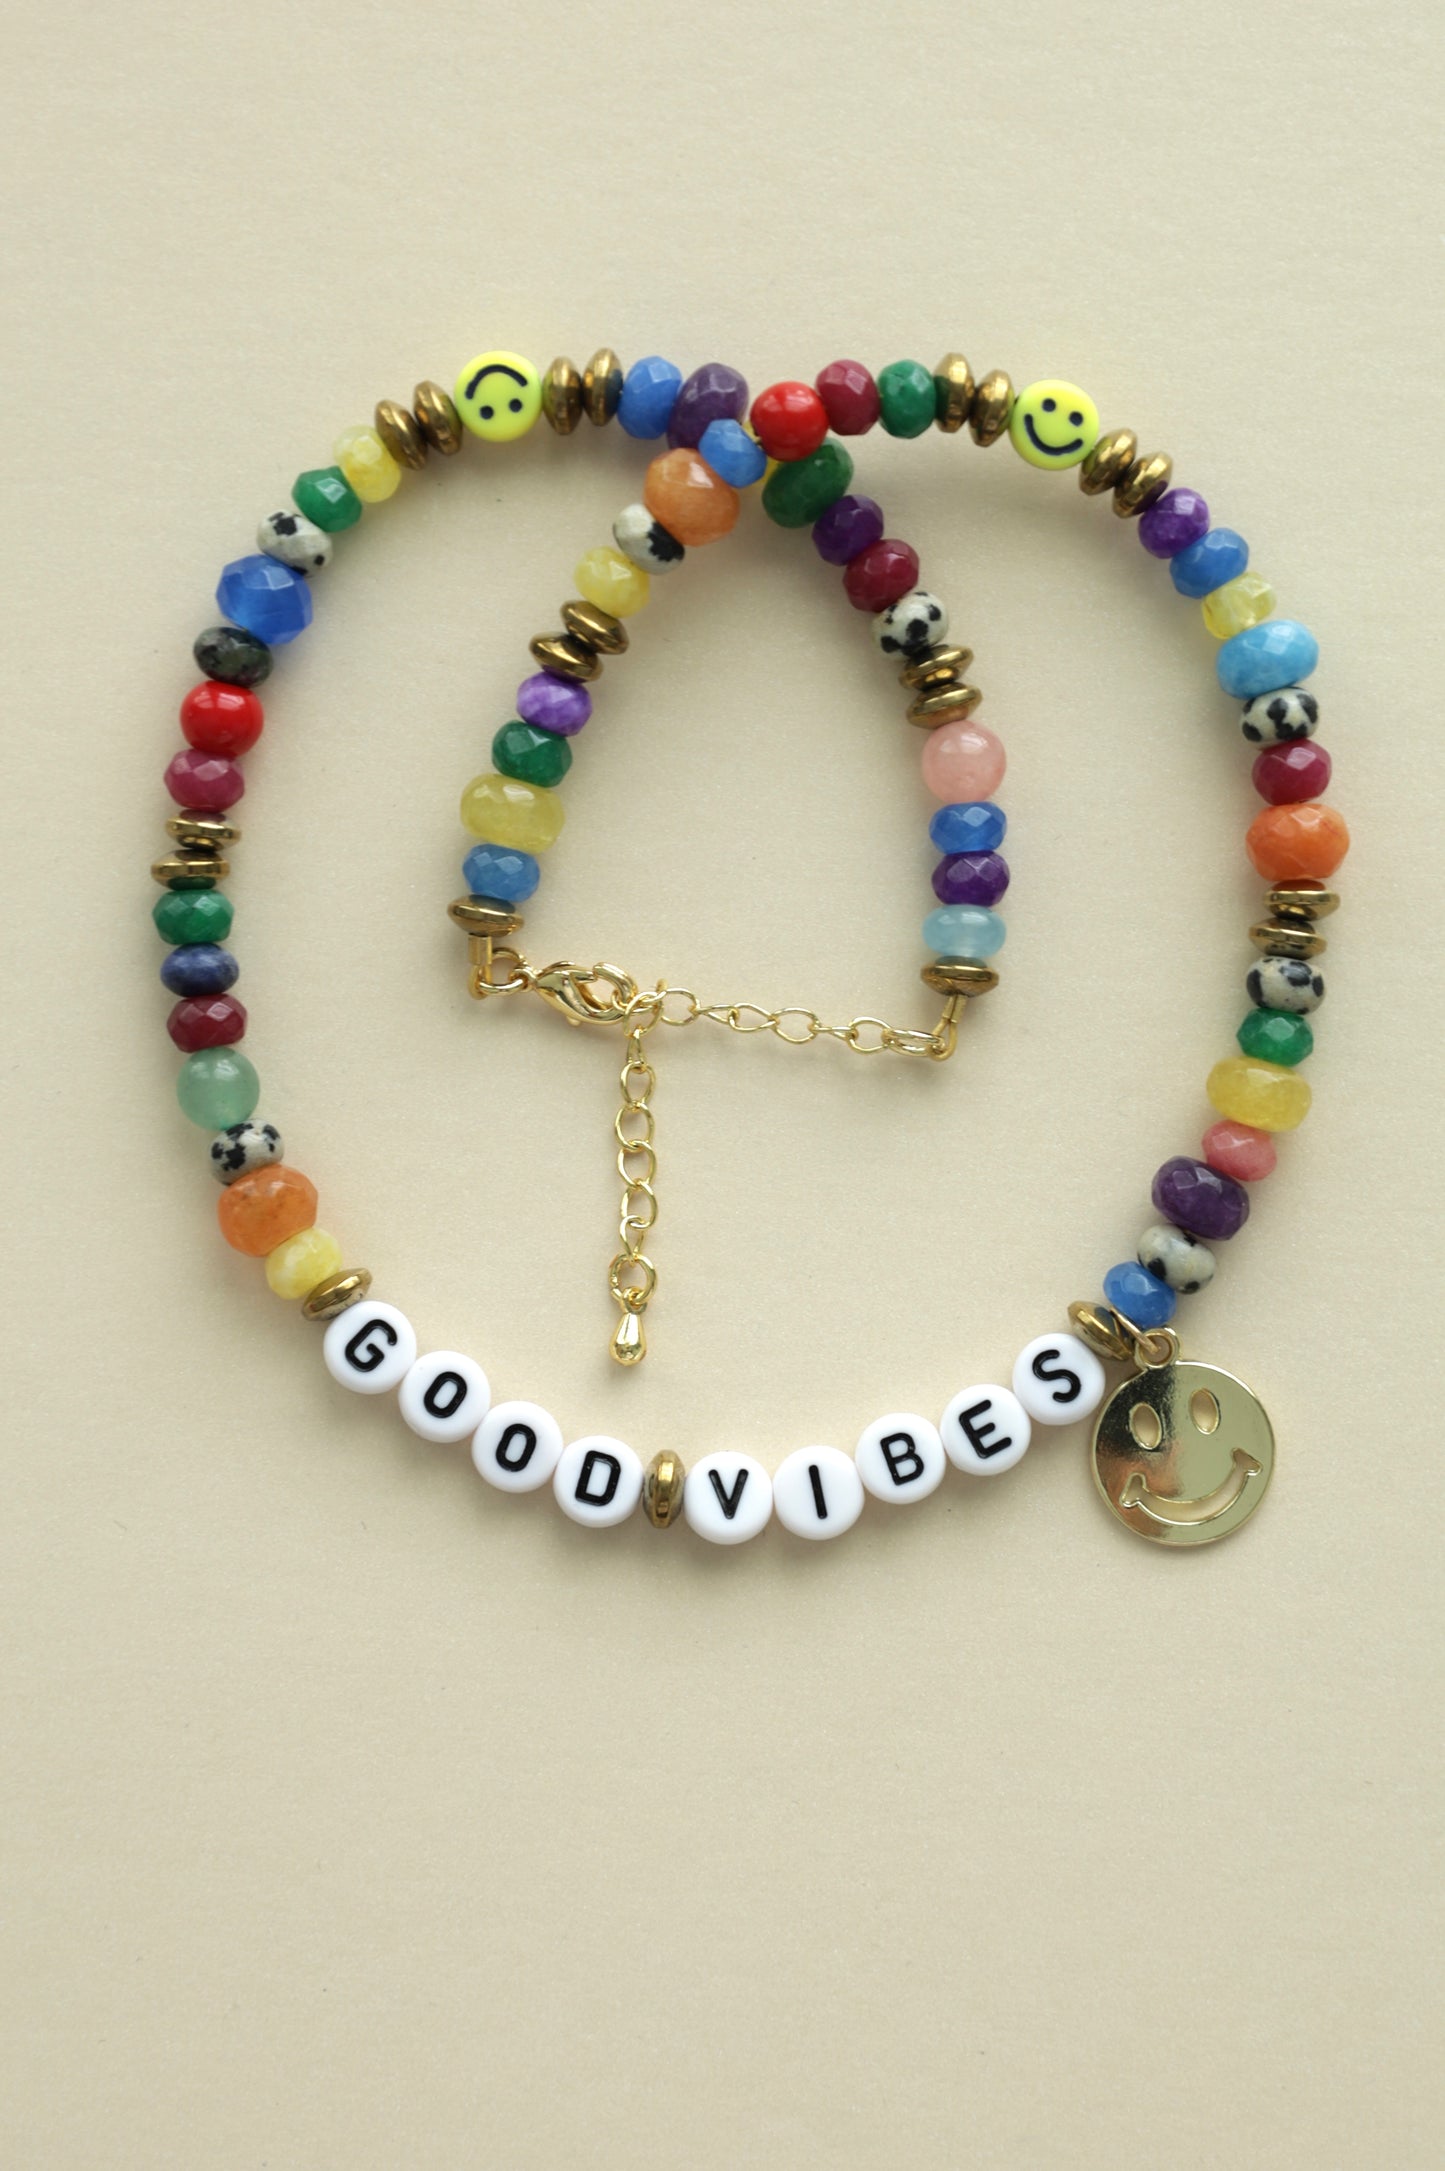 GOOD VIBES beaded necklace